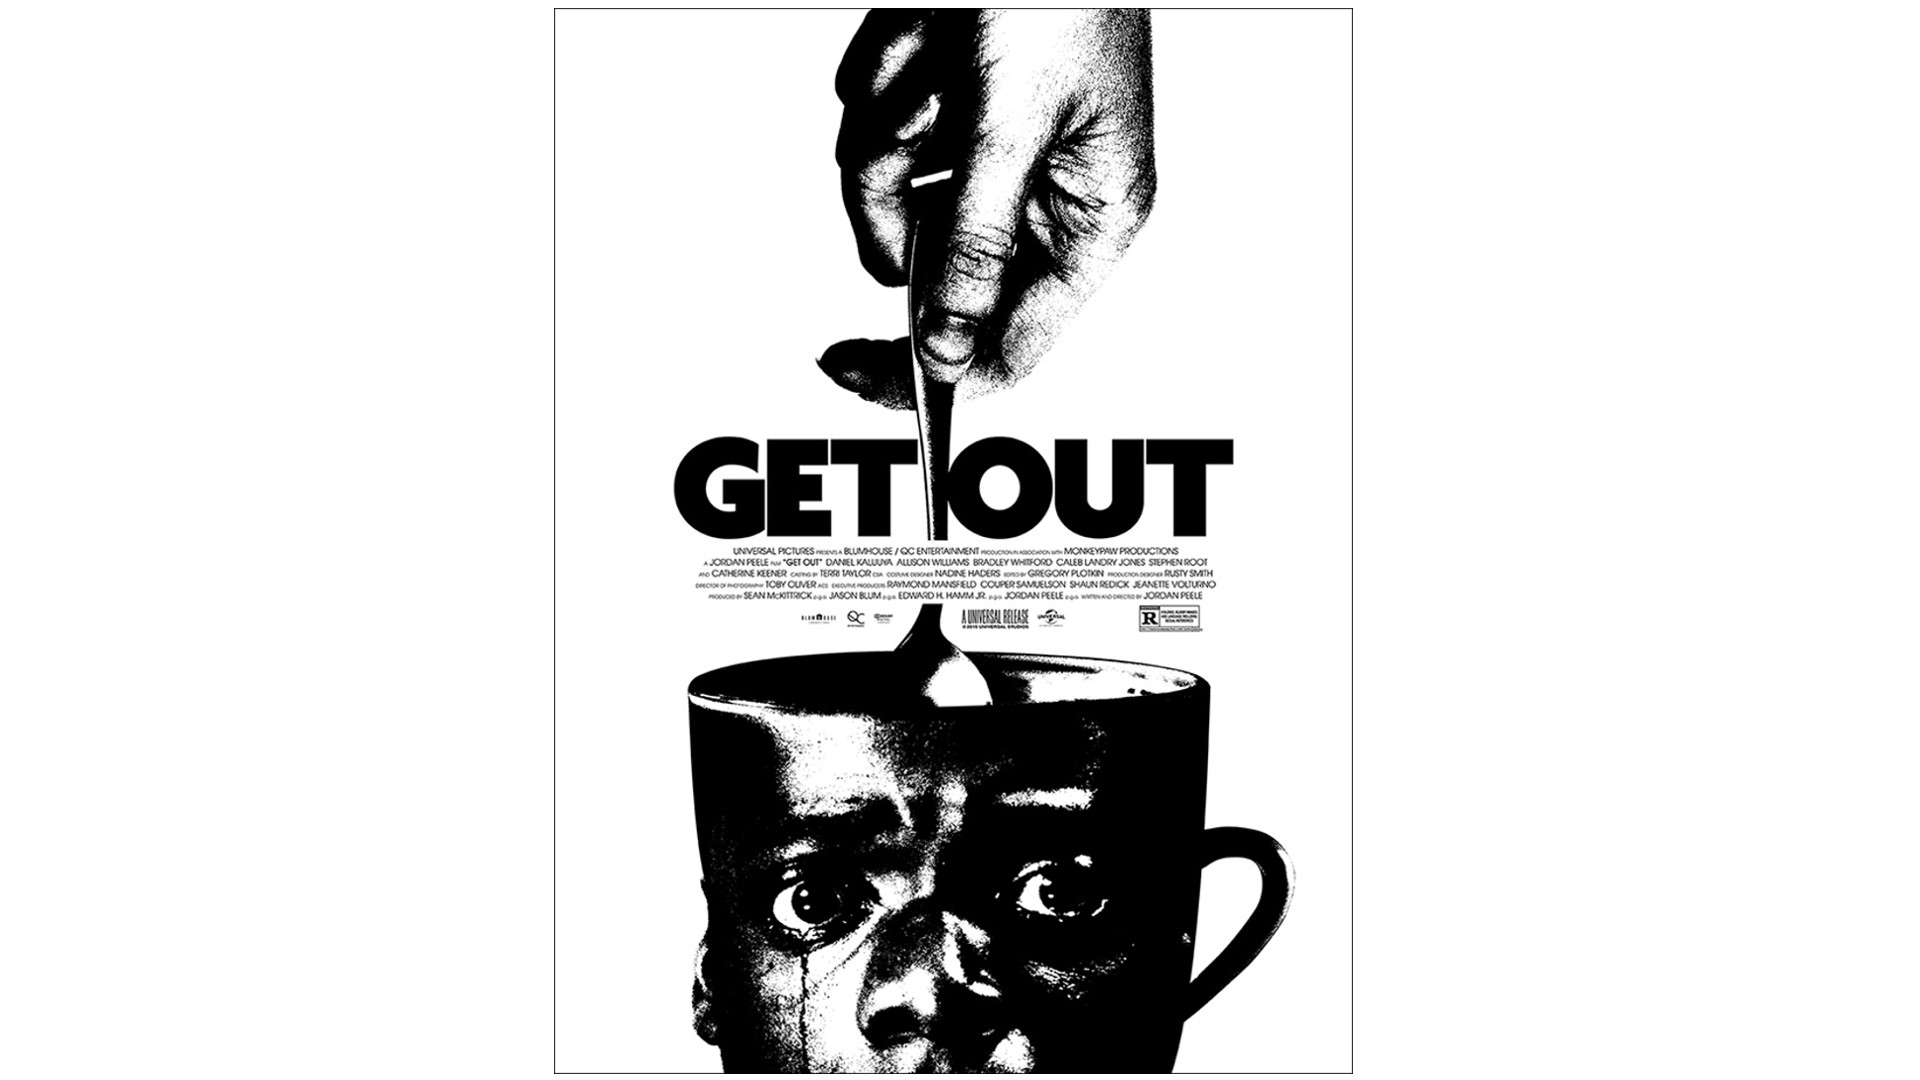 Horror film poster for Get Out